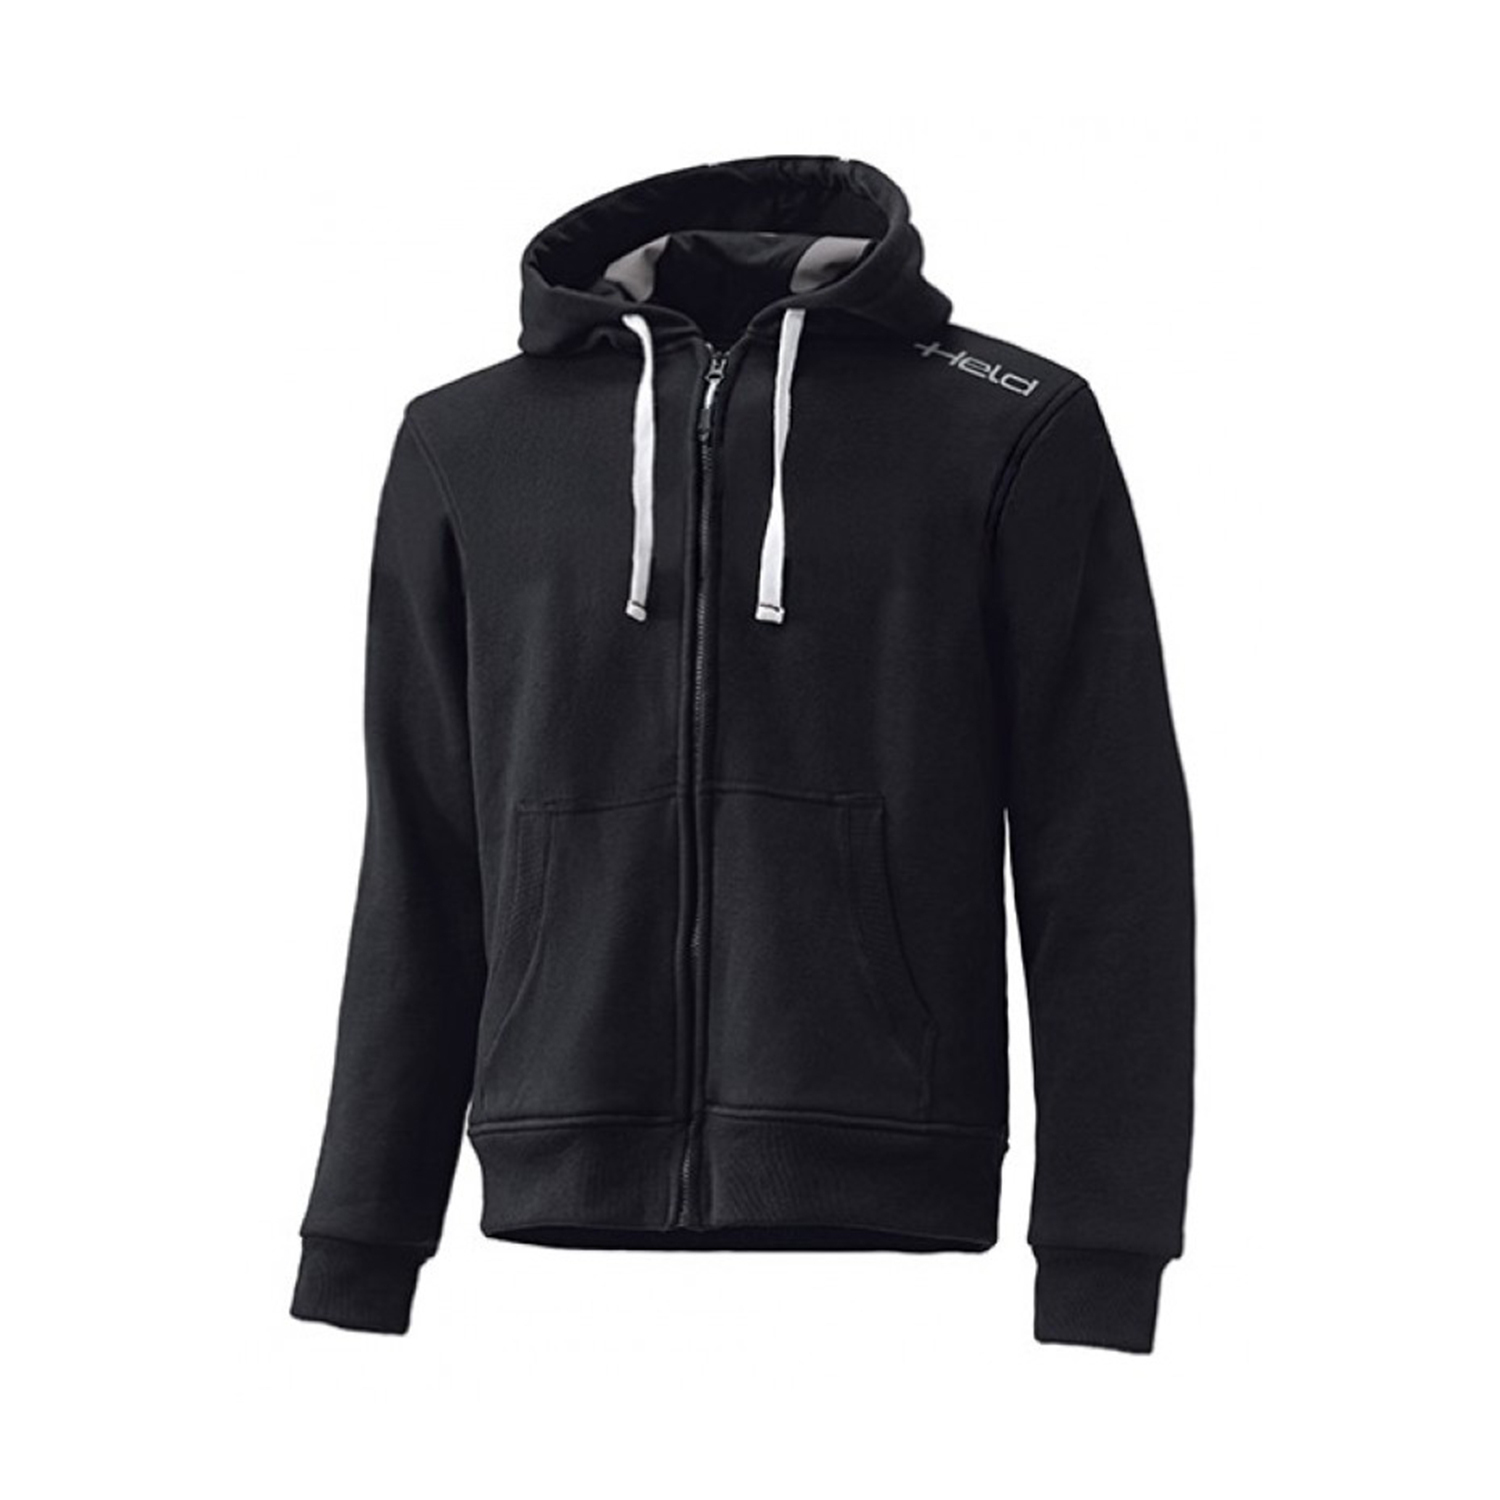 Held Tirano Kevlar Hoodie Black - Available in Various Sizes